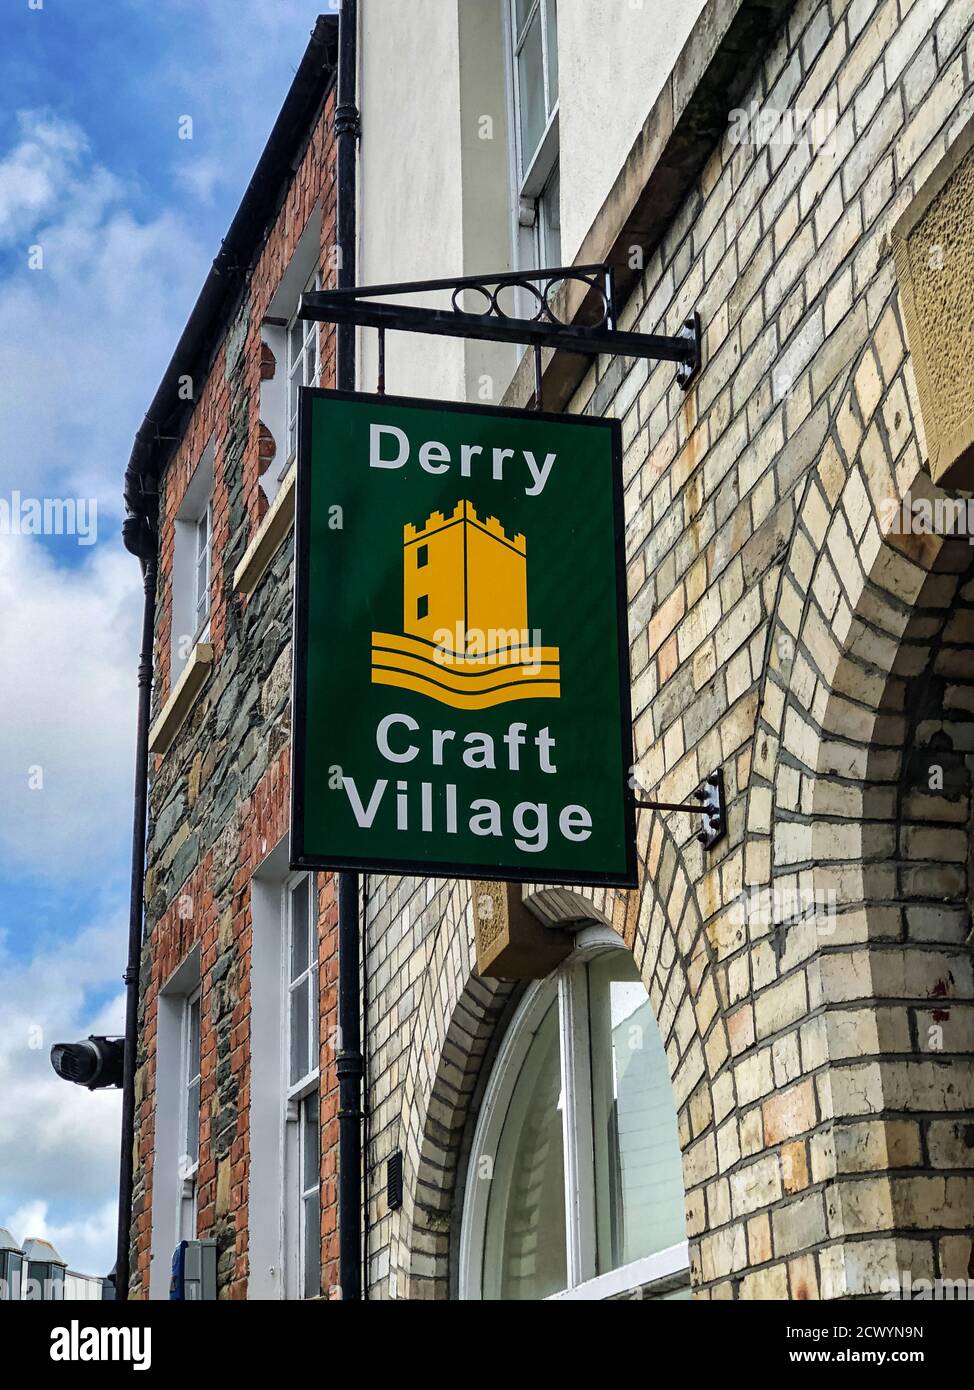 Derry, Northern Ireland- Sept 25, 2020: The front entrance and sign for the Craft Village in Derry Northern Ireland. Stock Photo